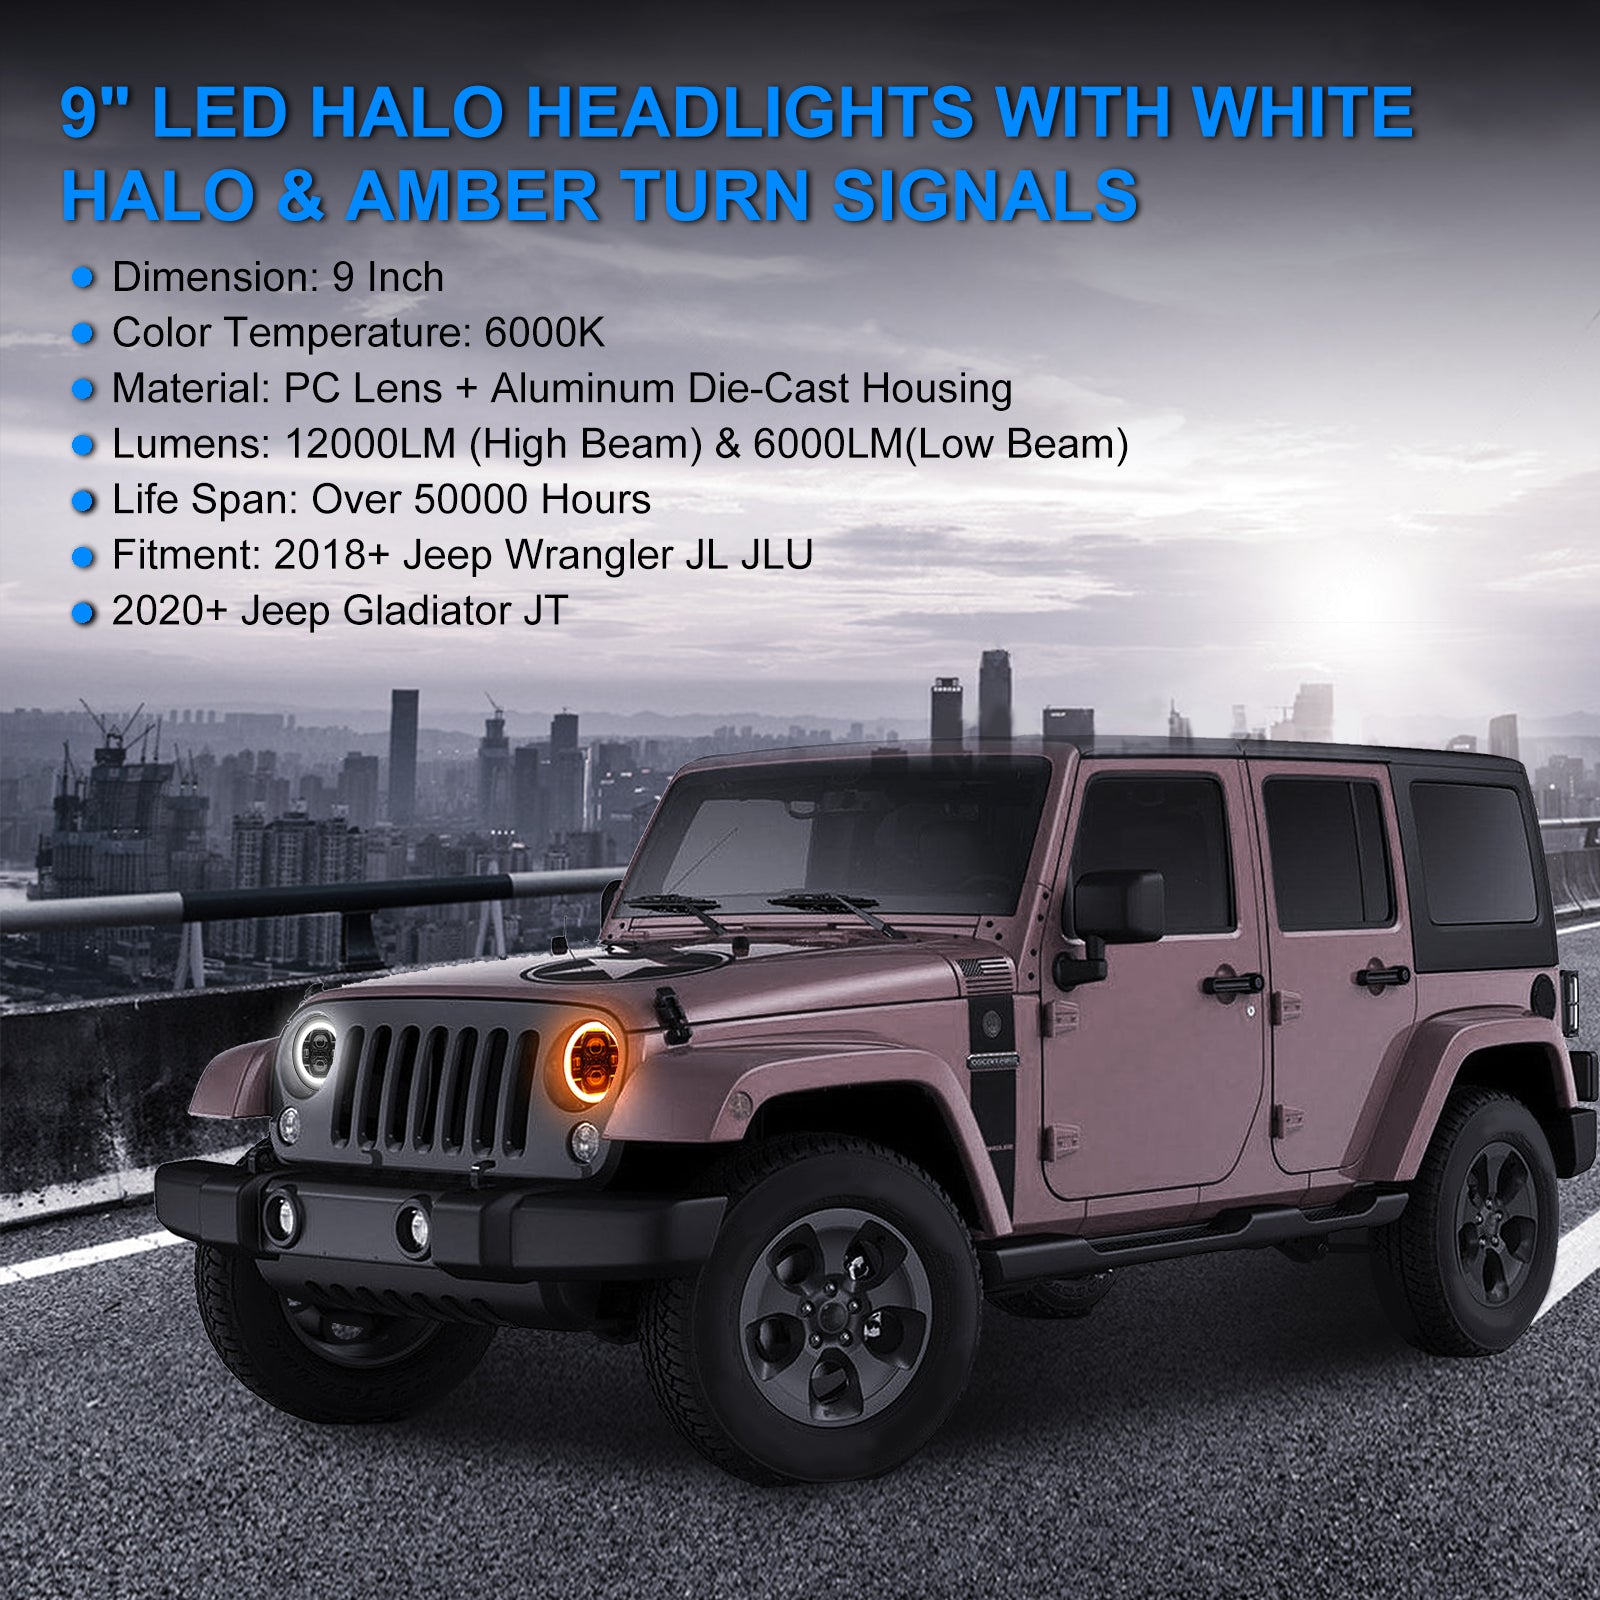 Newest 9" Halo LED Headlights With White DRL & Amber Turn Signals For 2018+ Jeep Wrangler JL And Jeep Gladiator JT